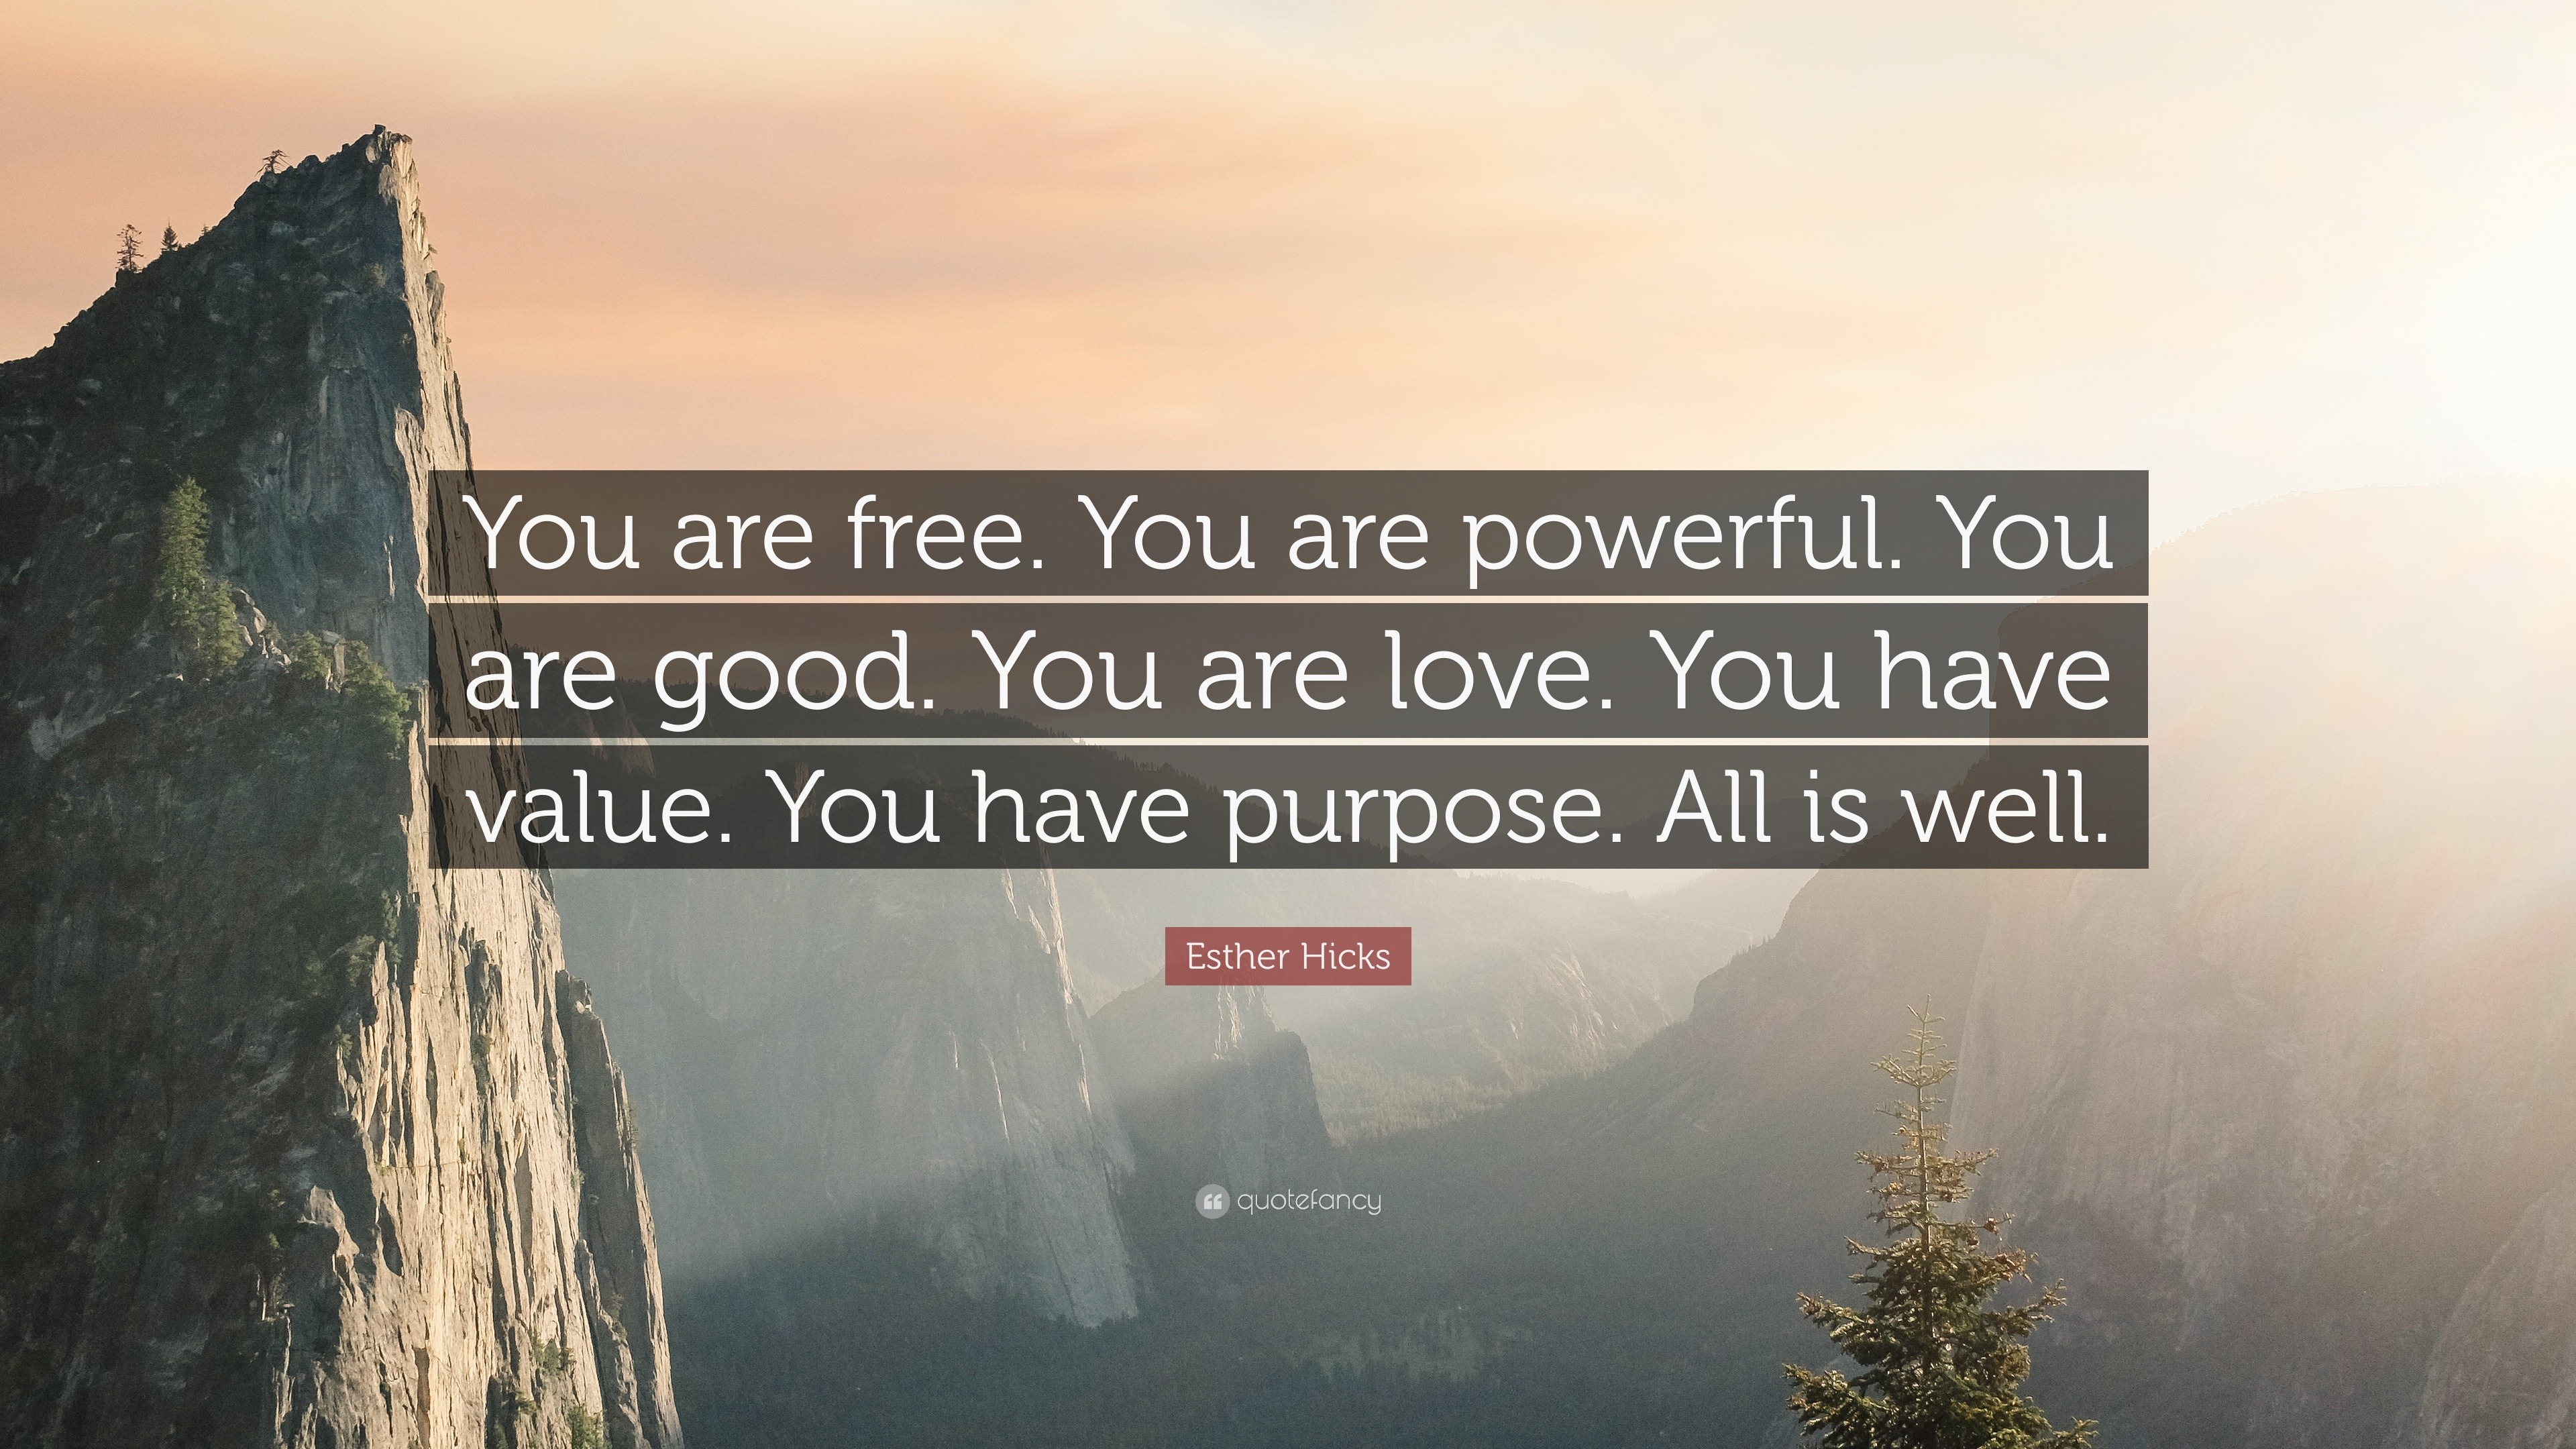 Esther Hicks Quote: “You are free. You are powerful. You are good. You are  love. You